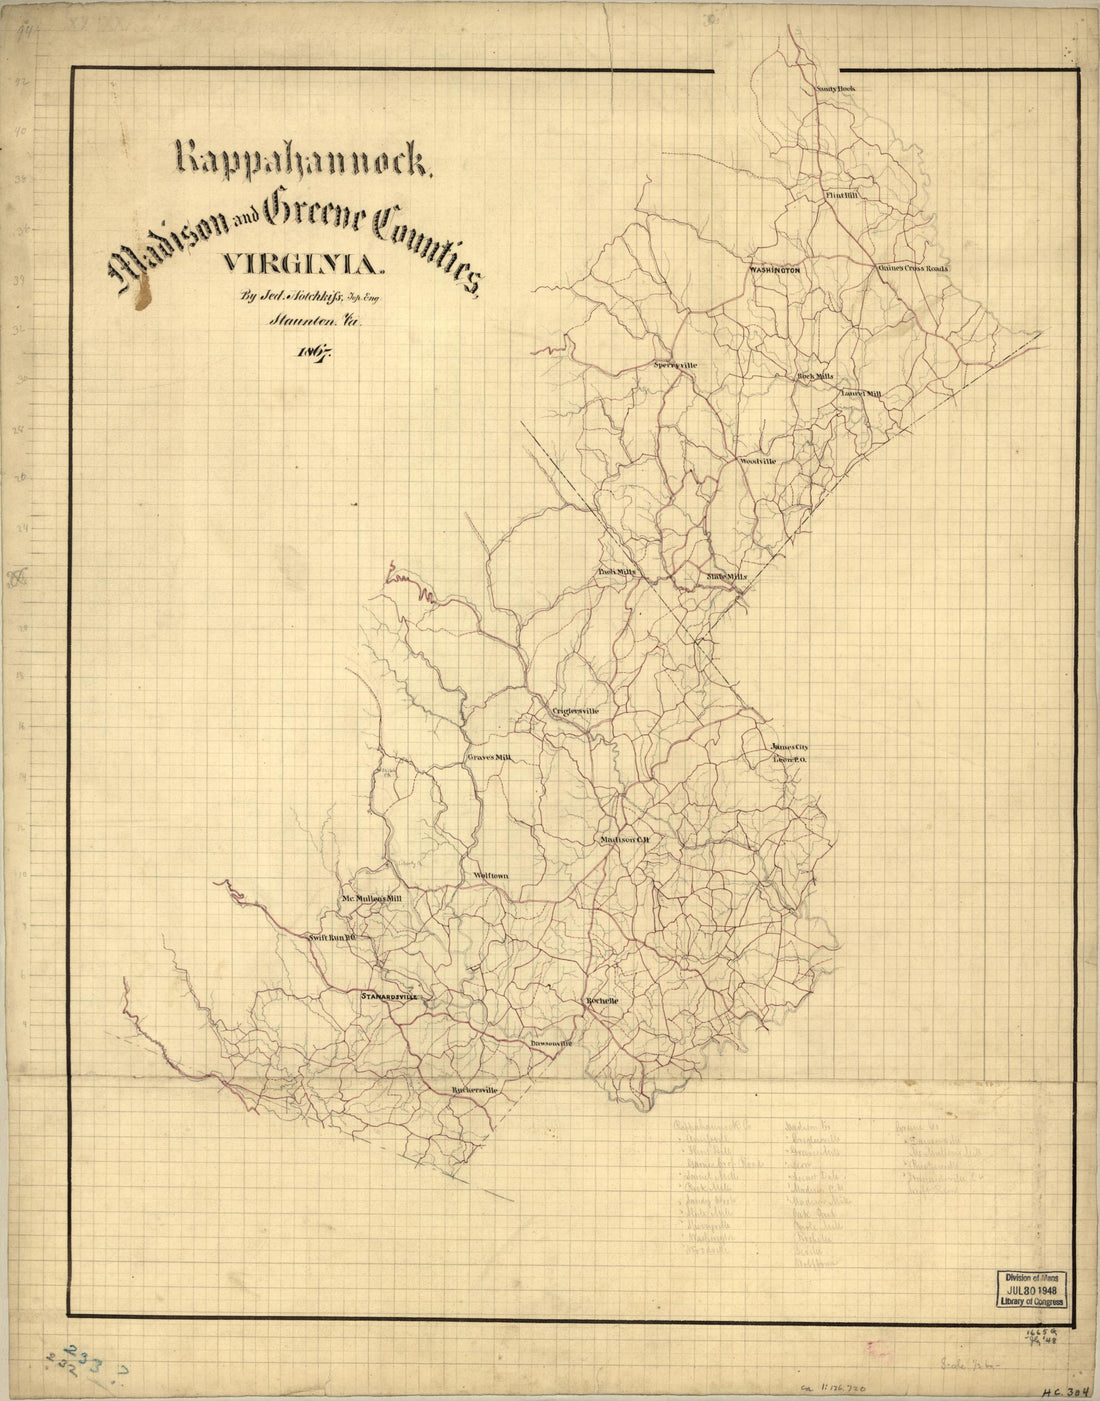 This old map of Rappahannock, Madison, and Greene Counties, Virginia from 1867 was created by Jedediah Hotchkiss in 1867